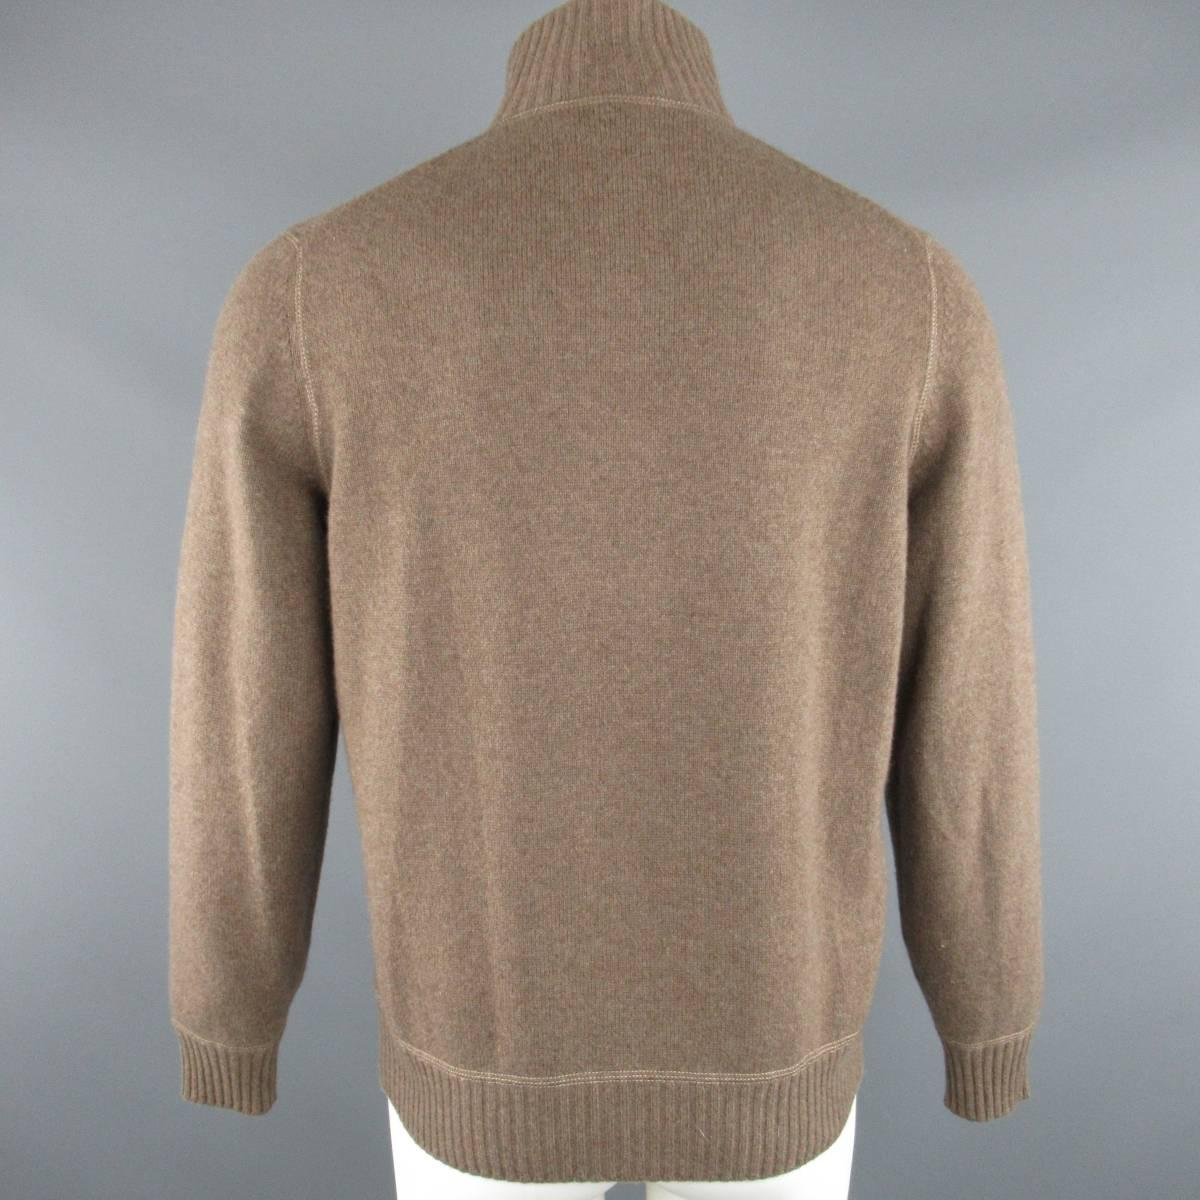 Men's BRUNELLO CUCINELLI S Brown & Gray Knitted Wool / Cashmere Sweater 2